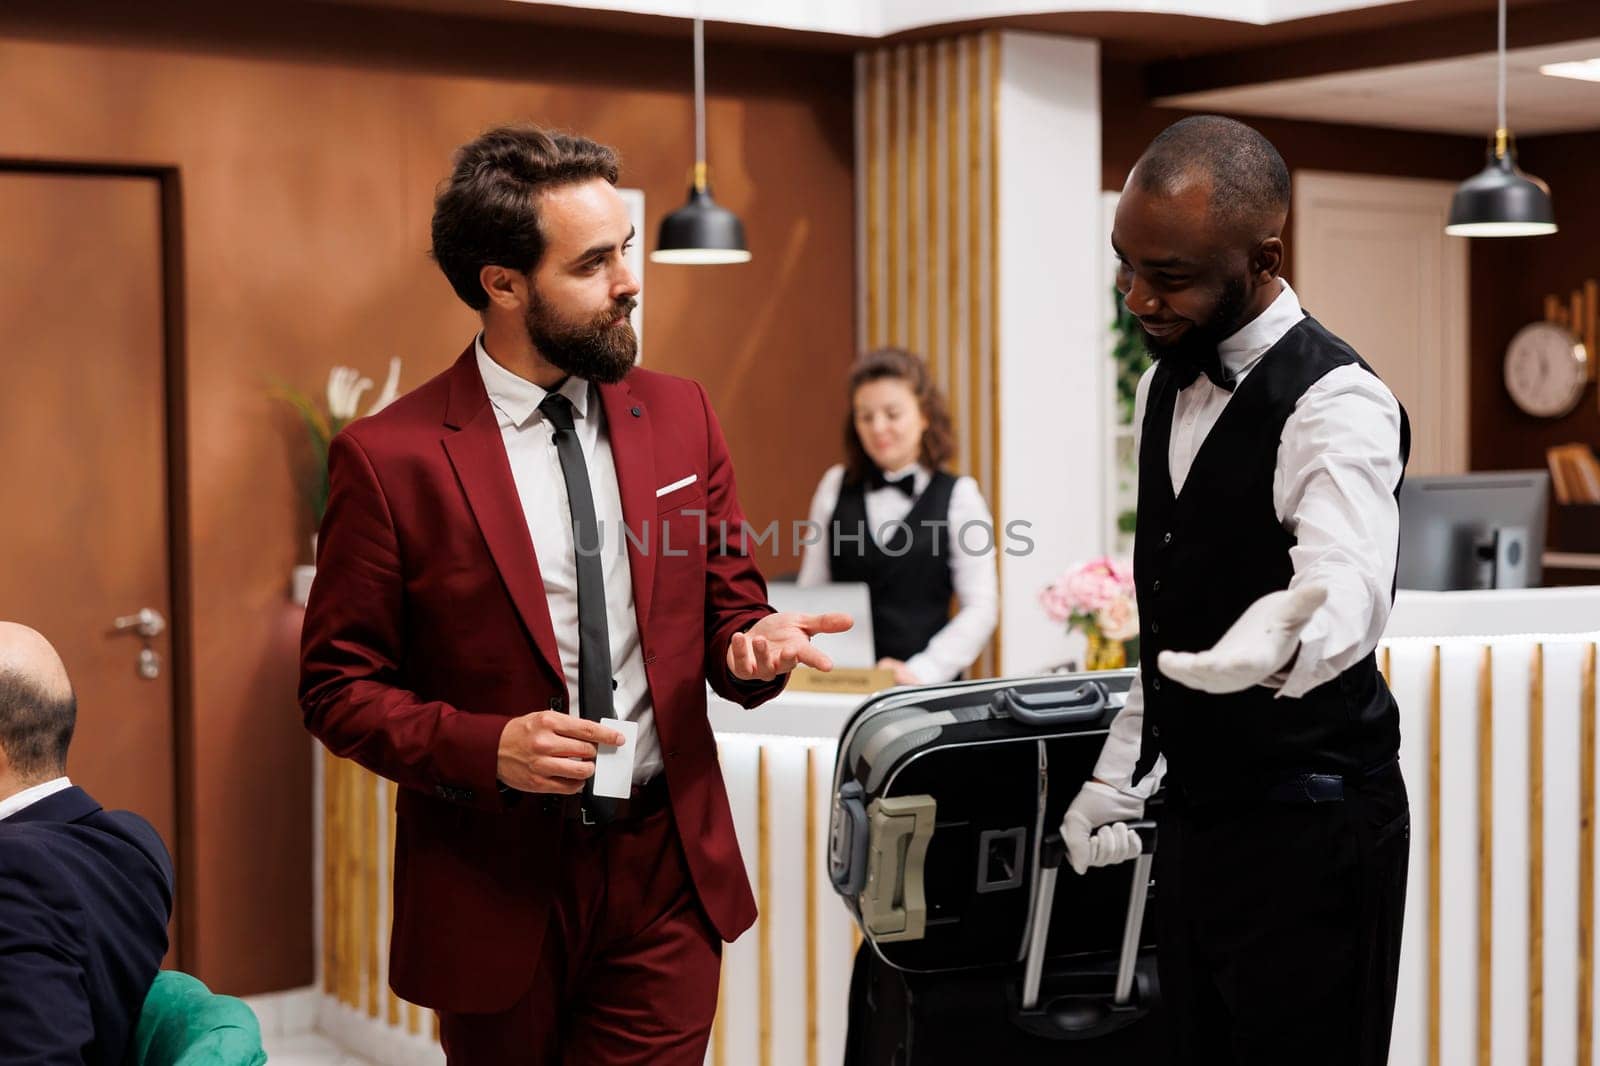 Bellboy taking guest to his hotel room by DCStudio